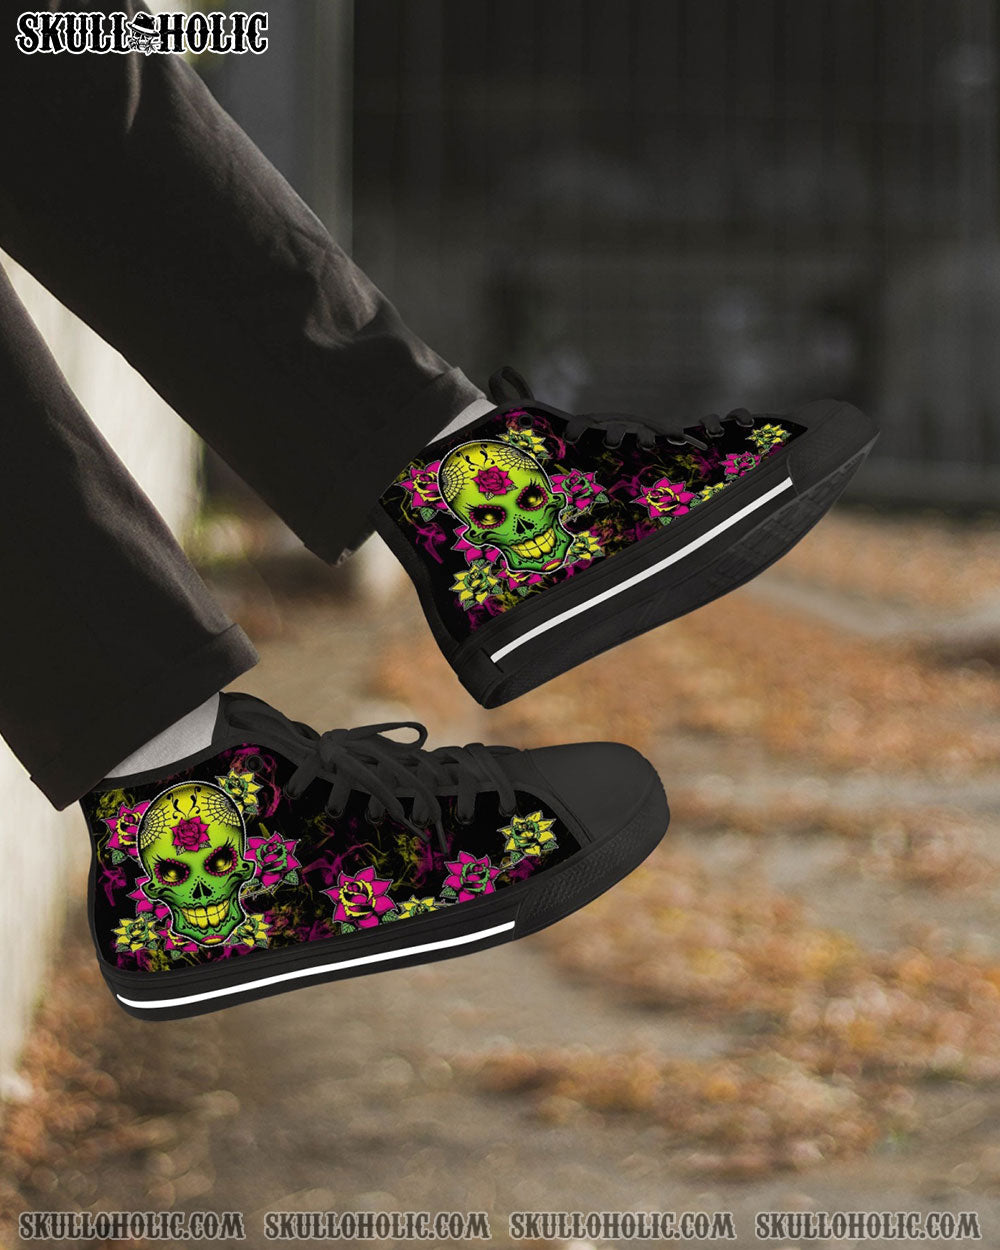 I AM A SWEET GIRL BUT IF YOU PISS ME OFF SUGAR SKULL HIGH TOP CANVAS SHOES - TLTW1412222